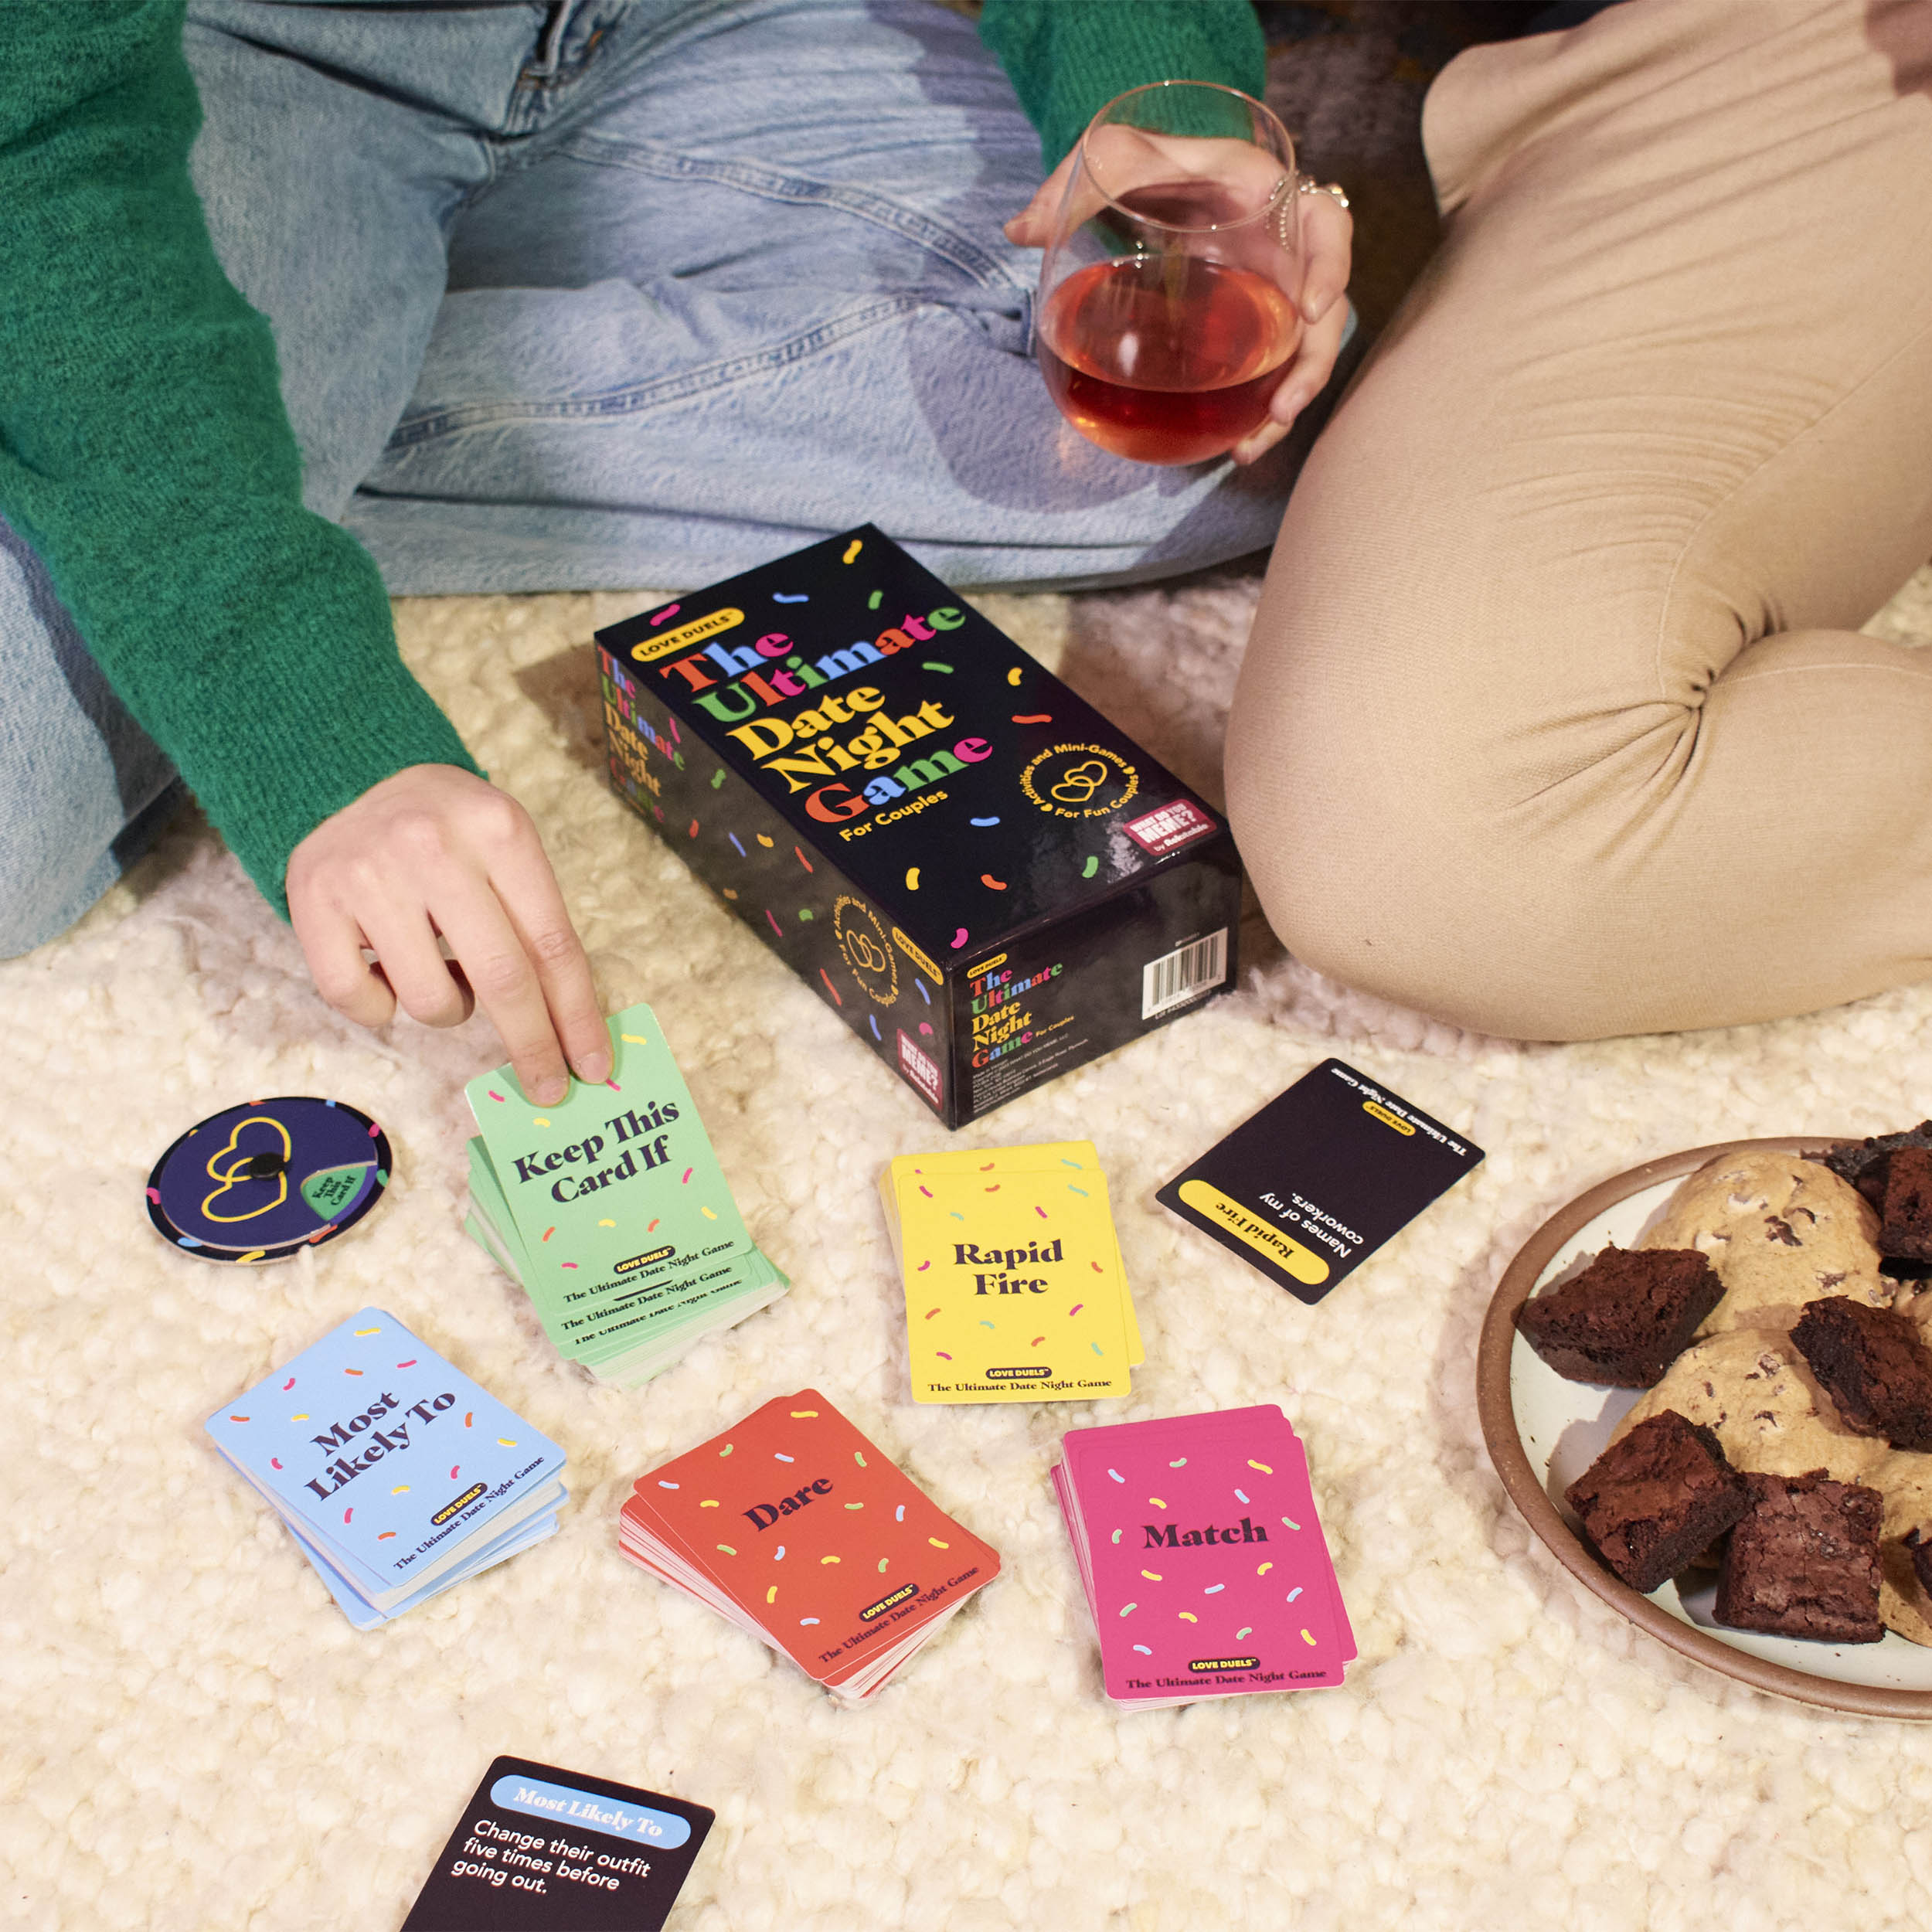 The Ultimate Date Night Game For Fun Couples